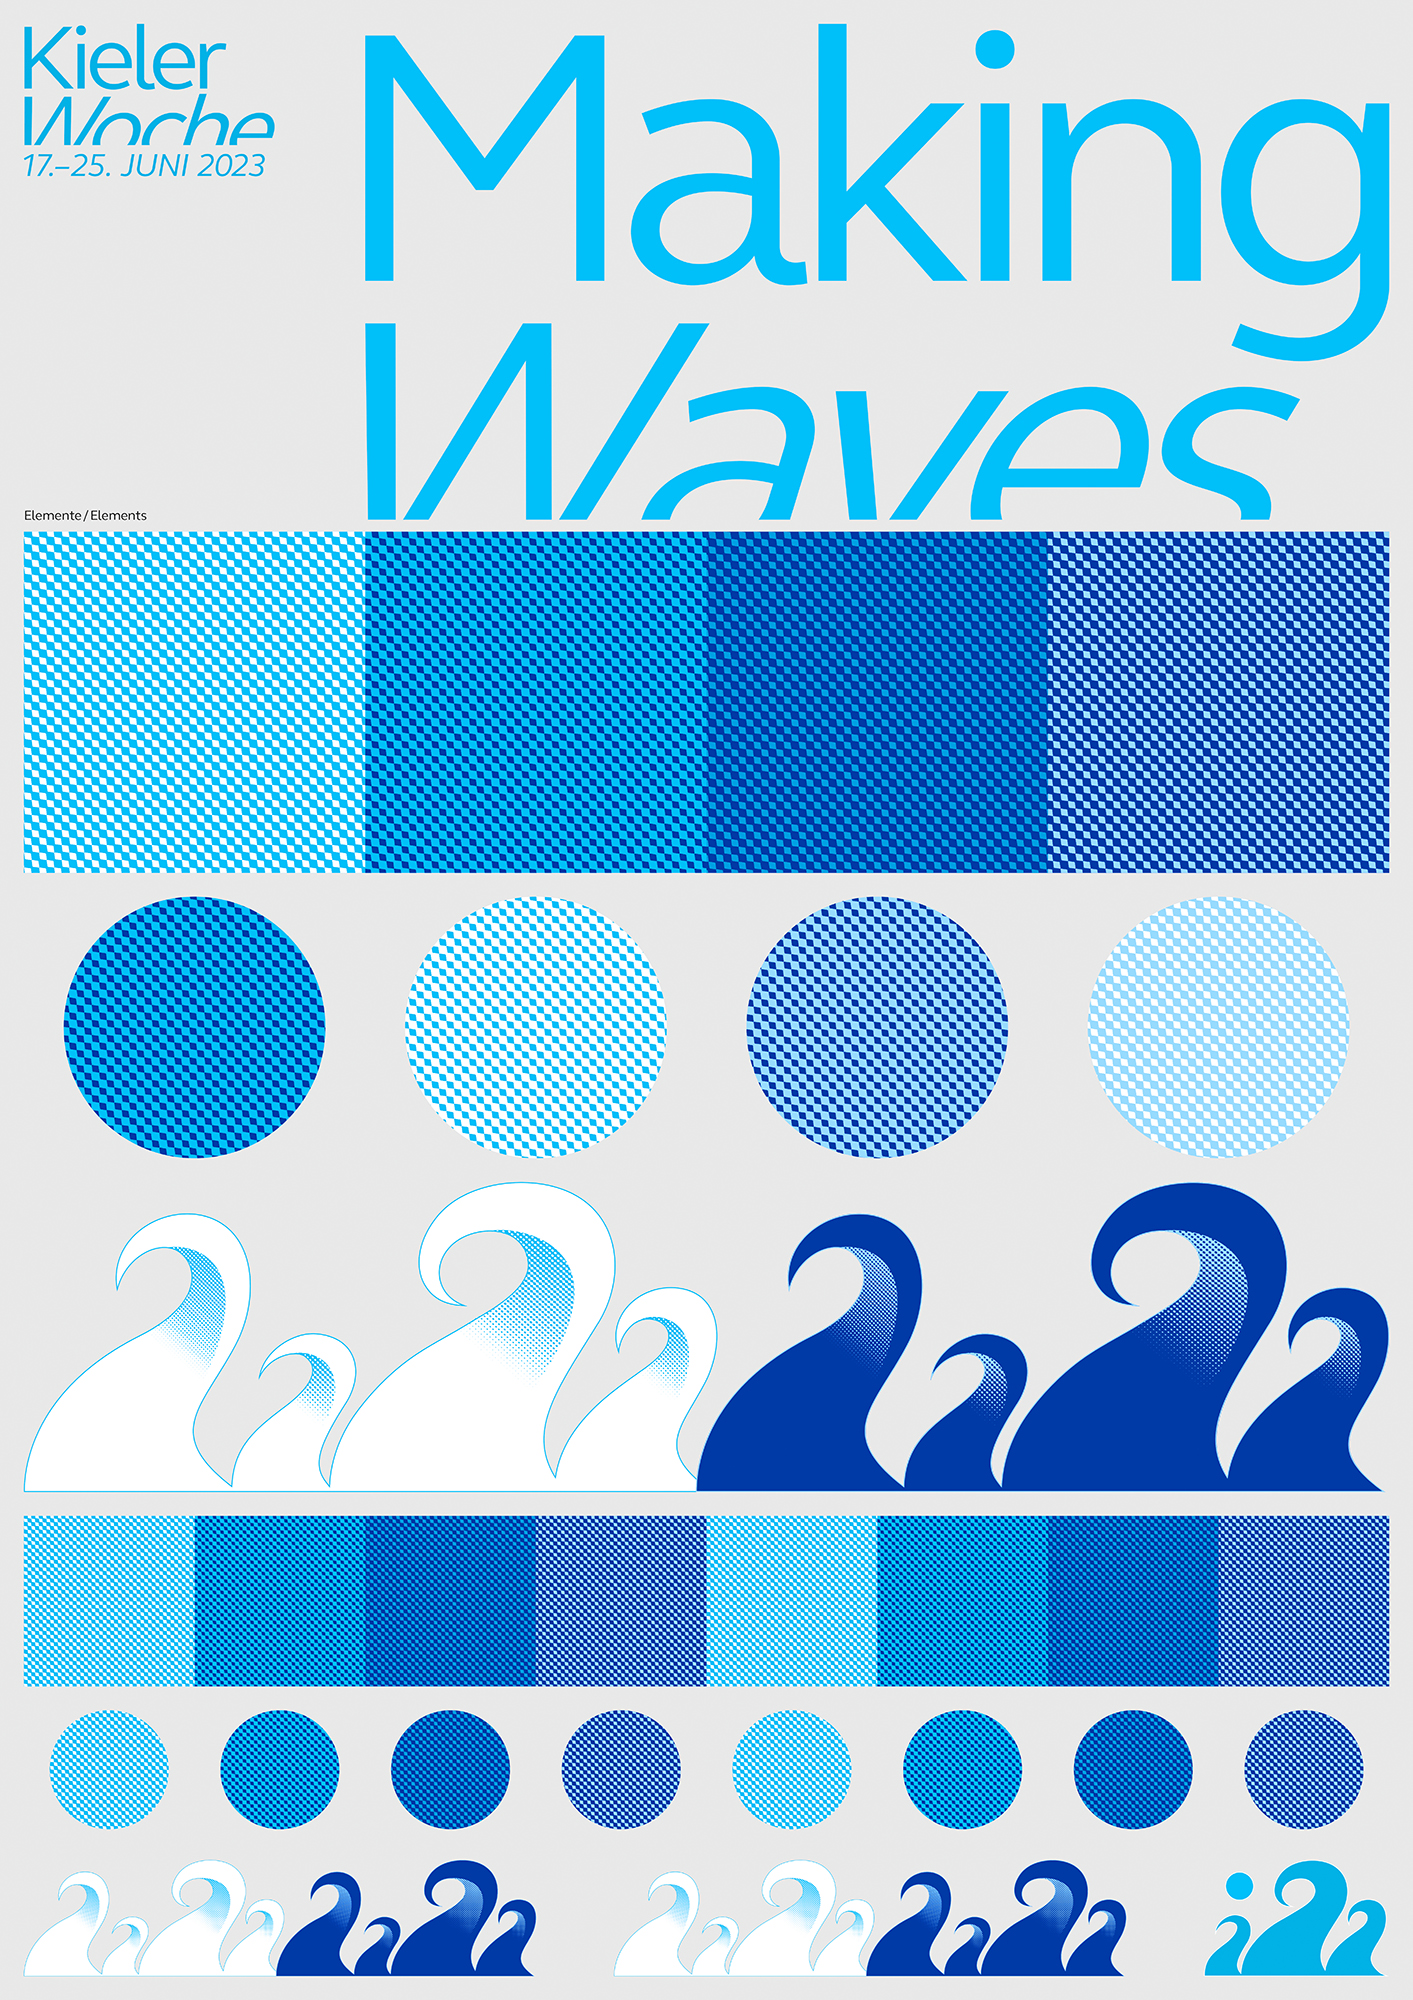 KW_WAVES_4